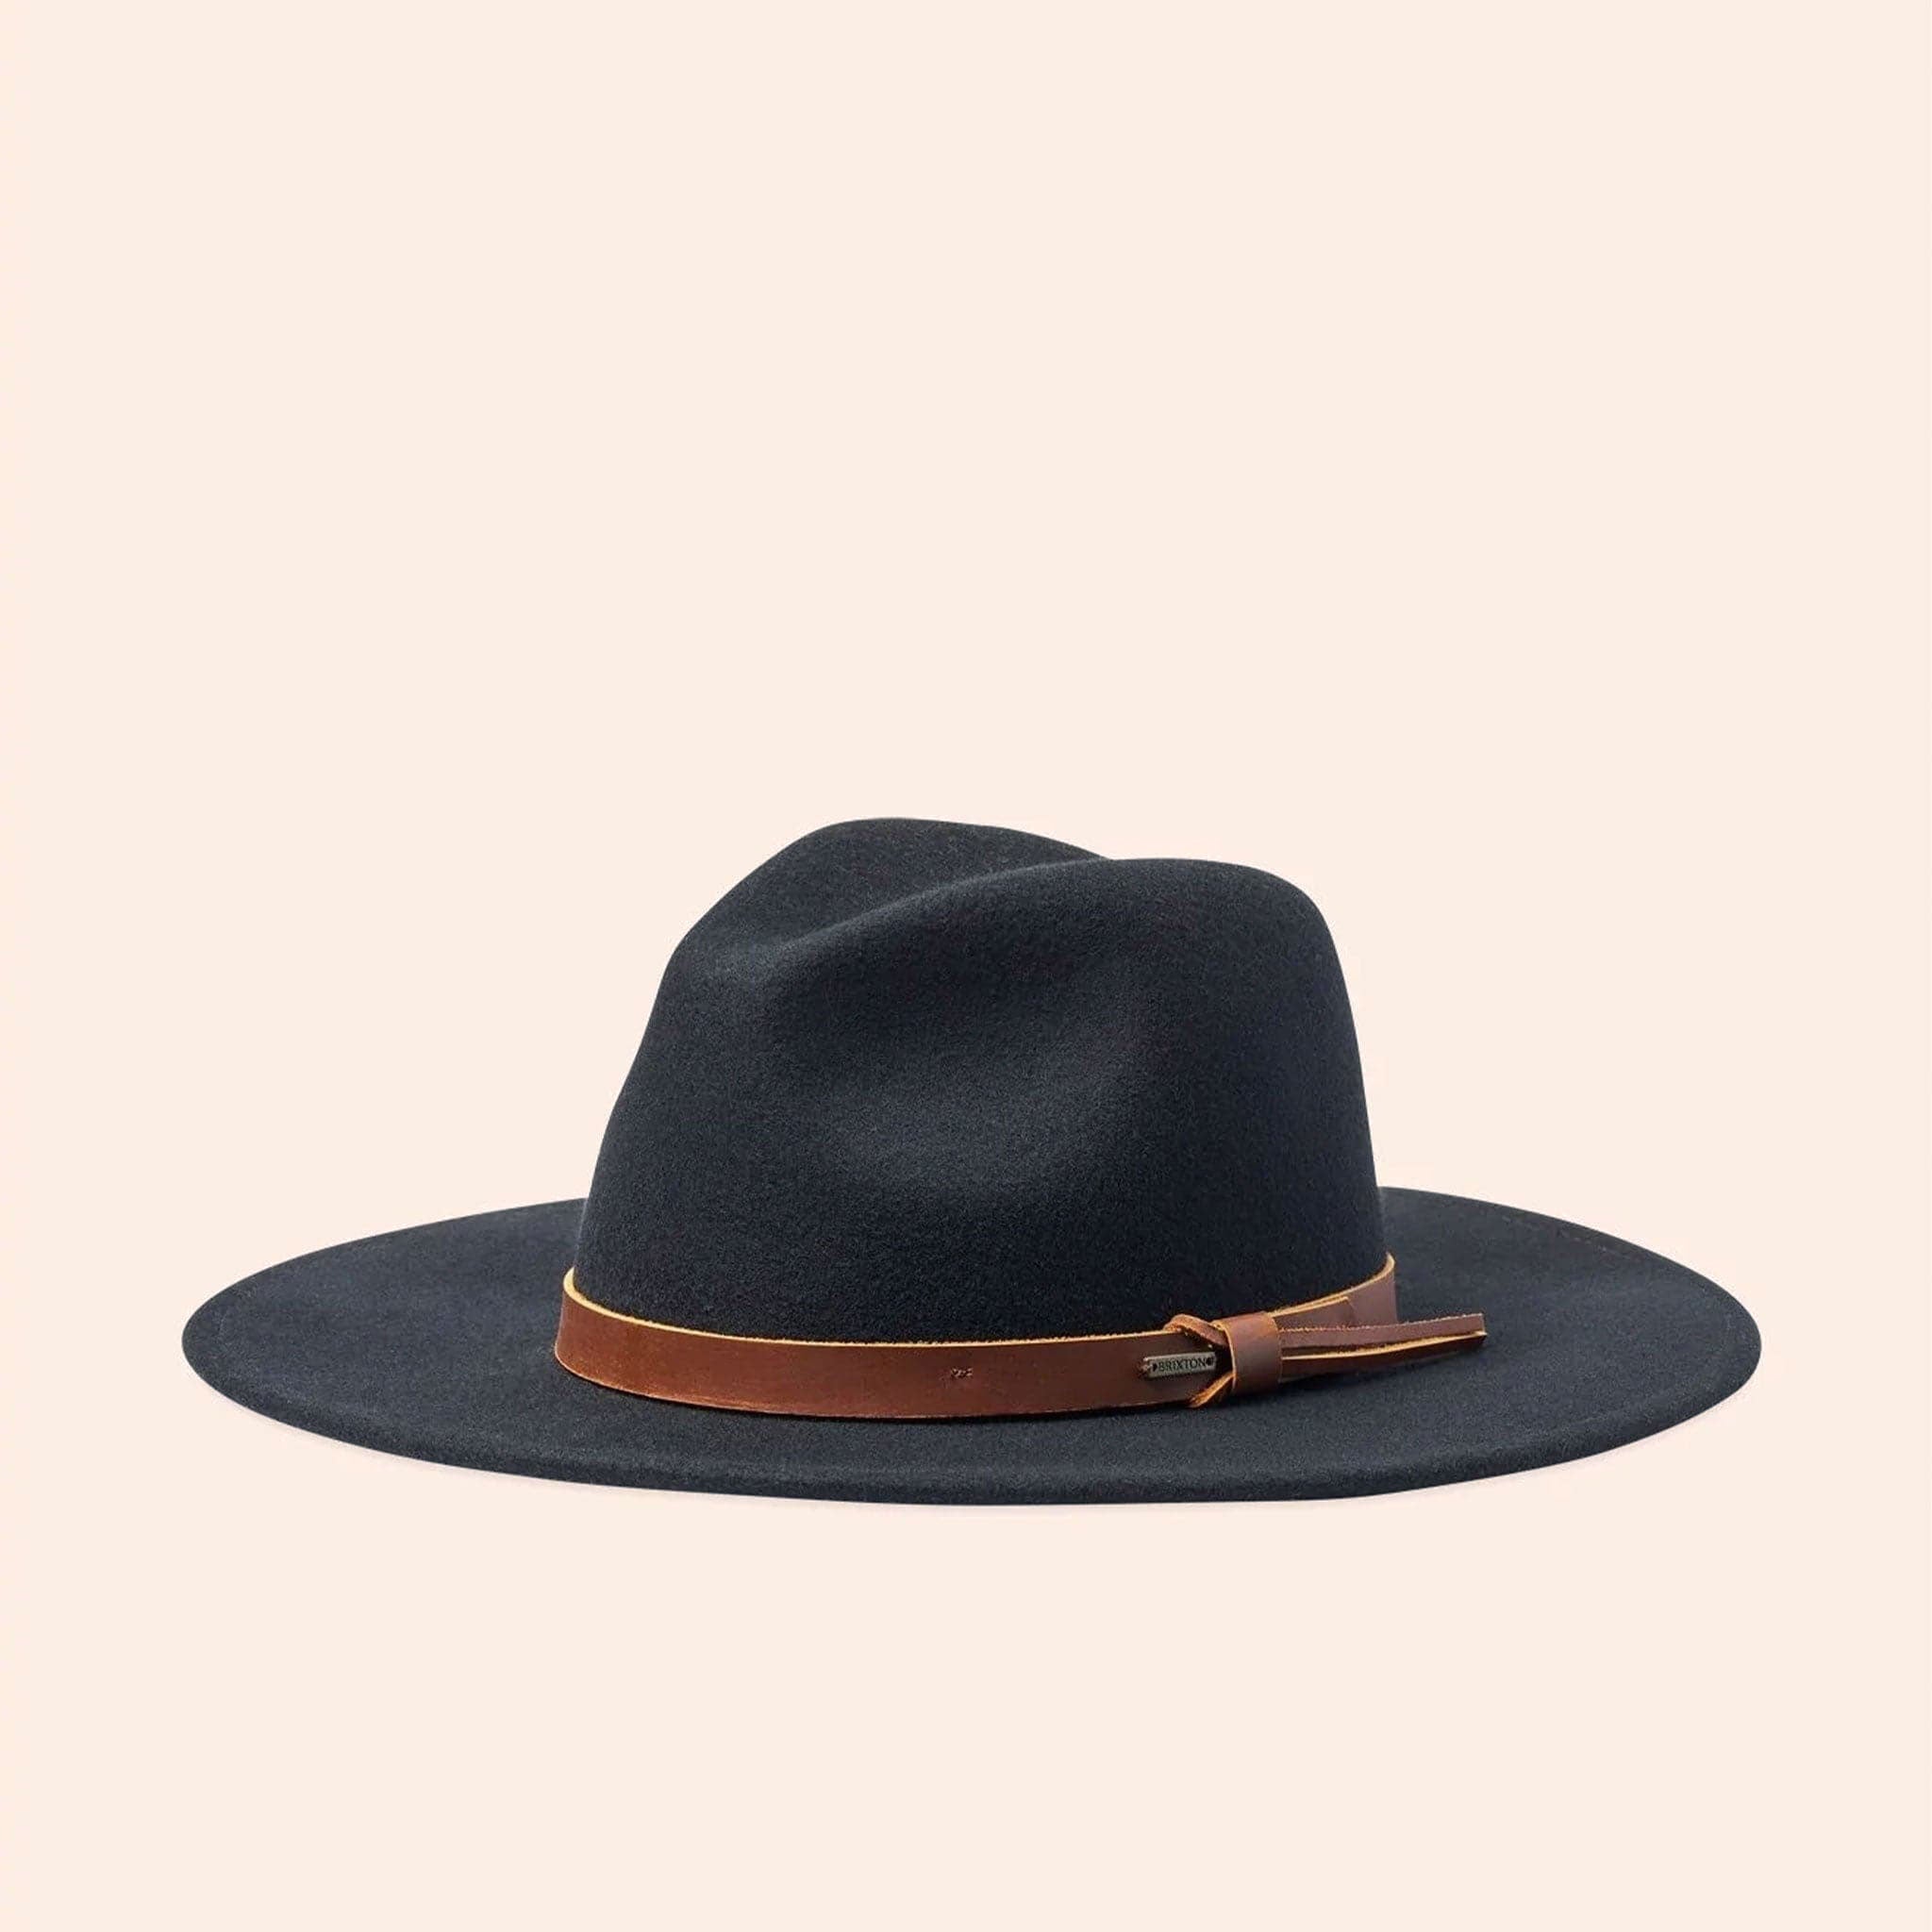 A black hat with a flat brim and a brown leather strap around the base.